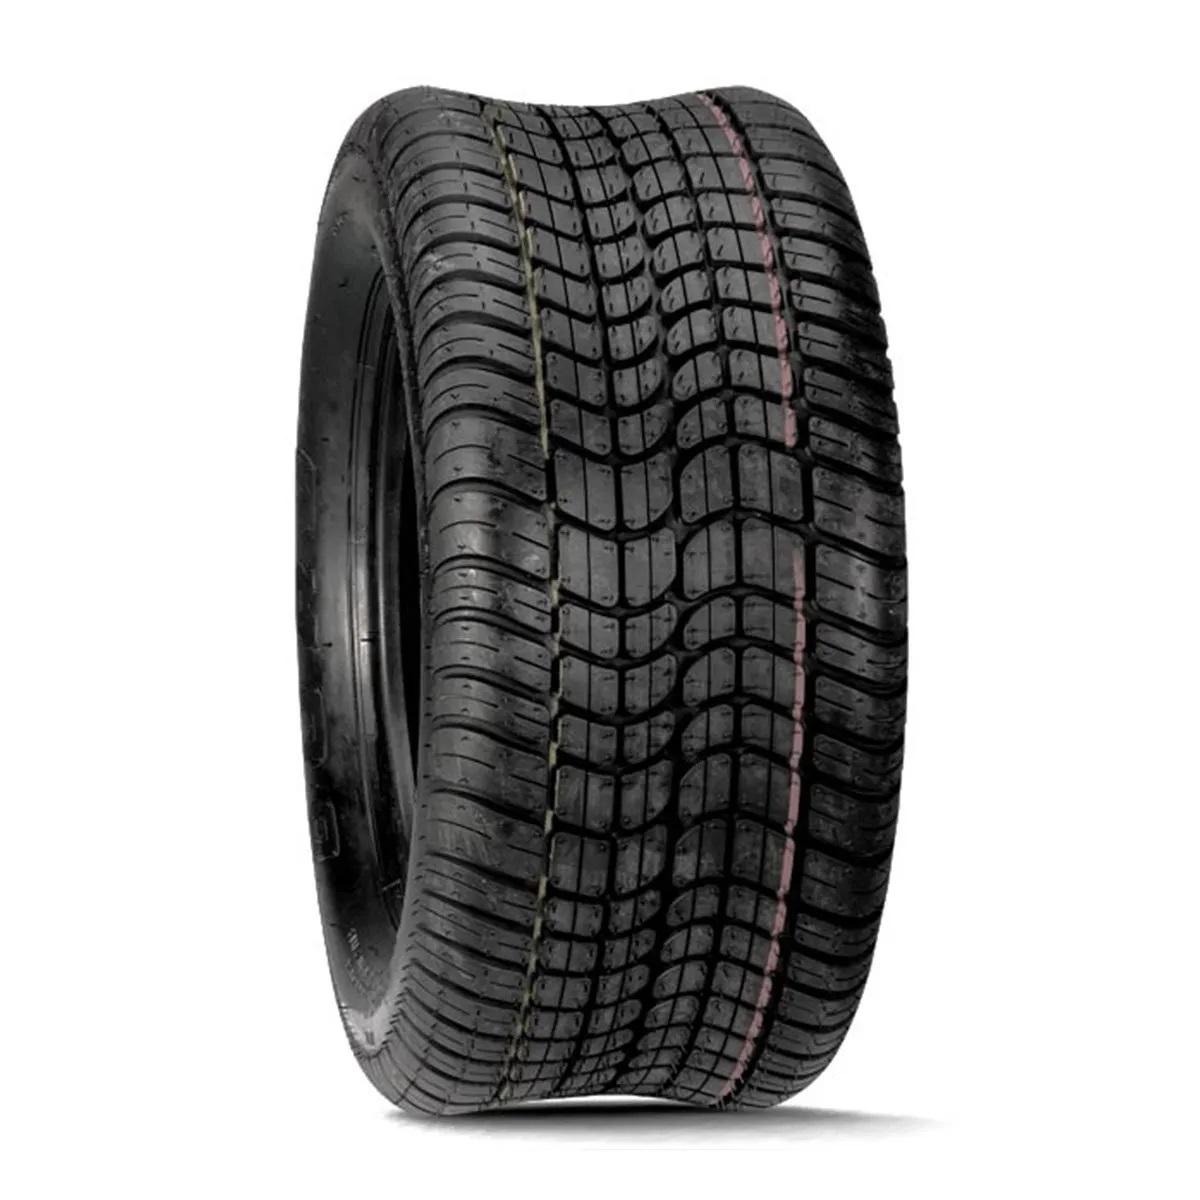 Duro Easy Street 205/50-10 4 Ply Golf Cart Tire